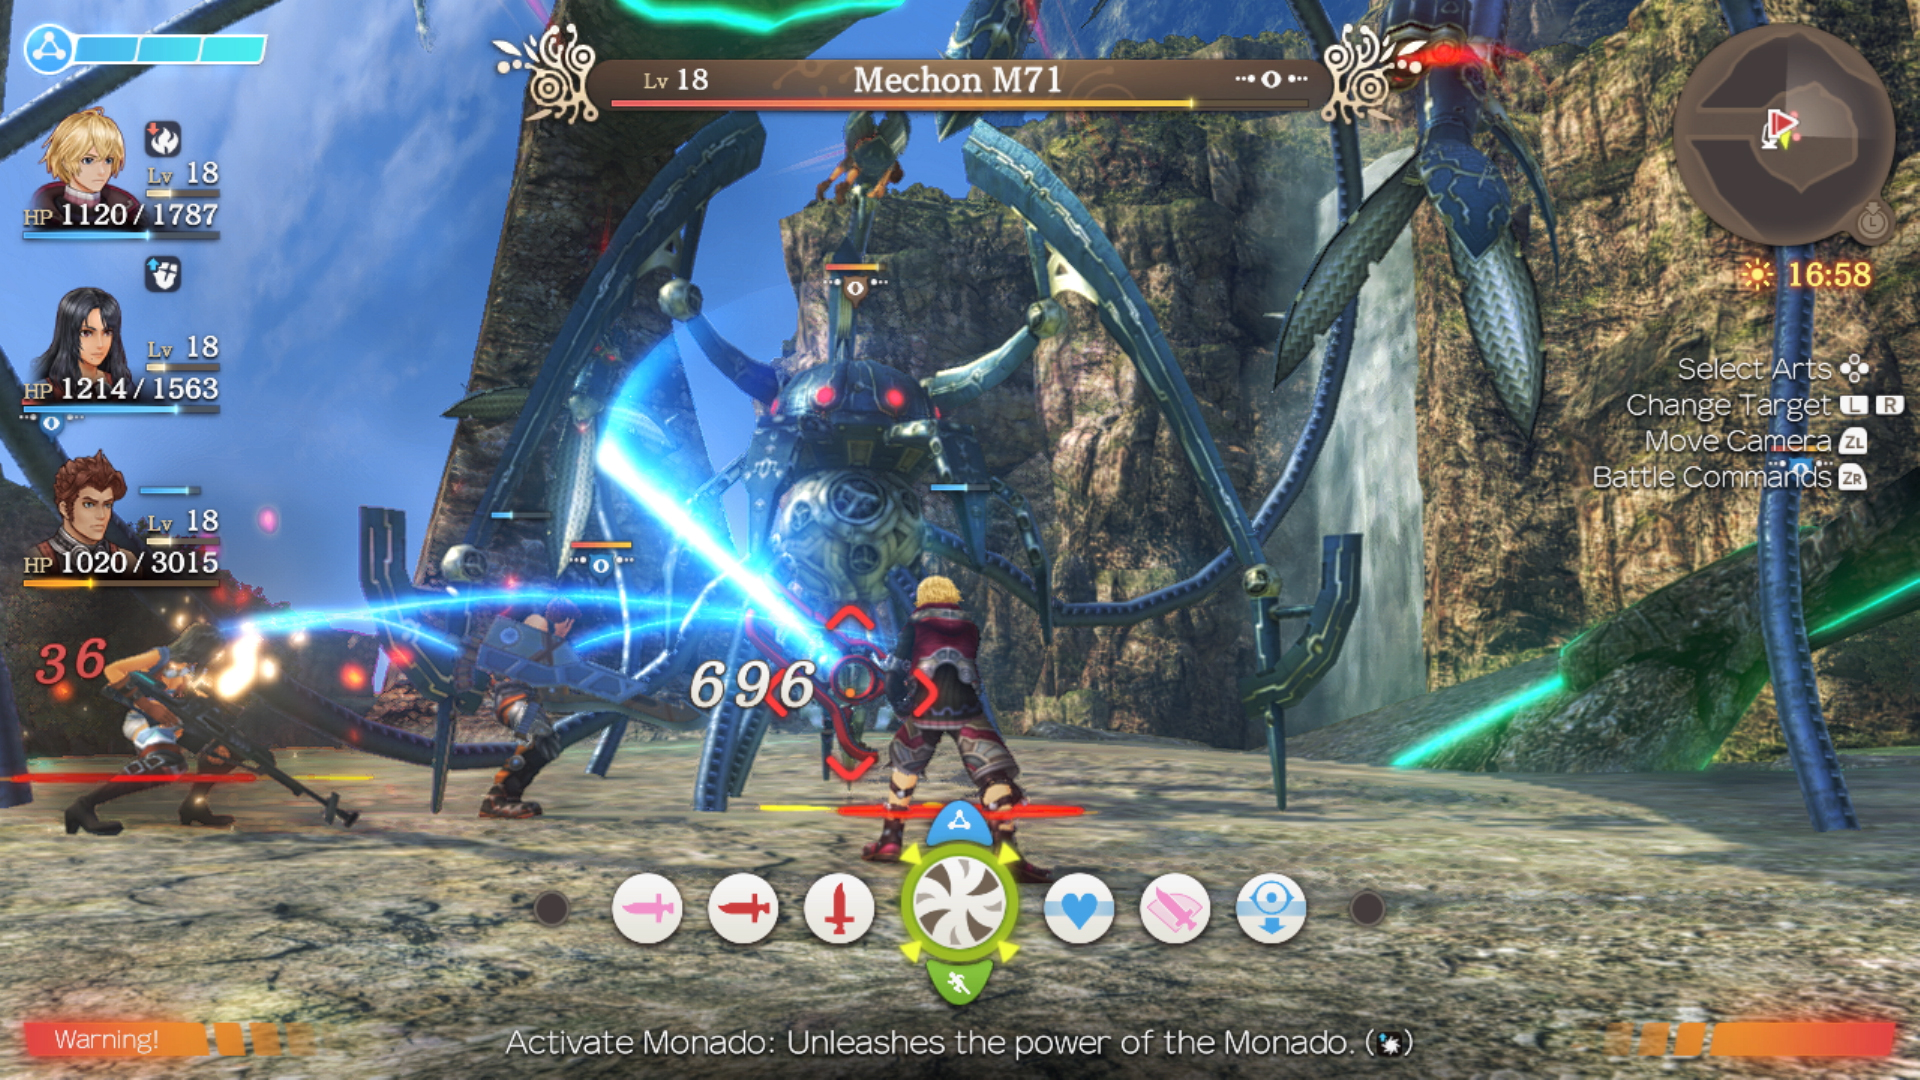 A party of JRPG protagonists battle a large metallic enemy 